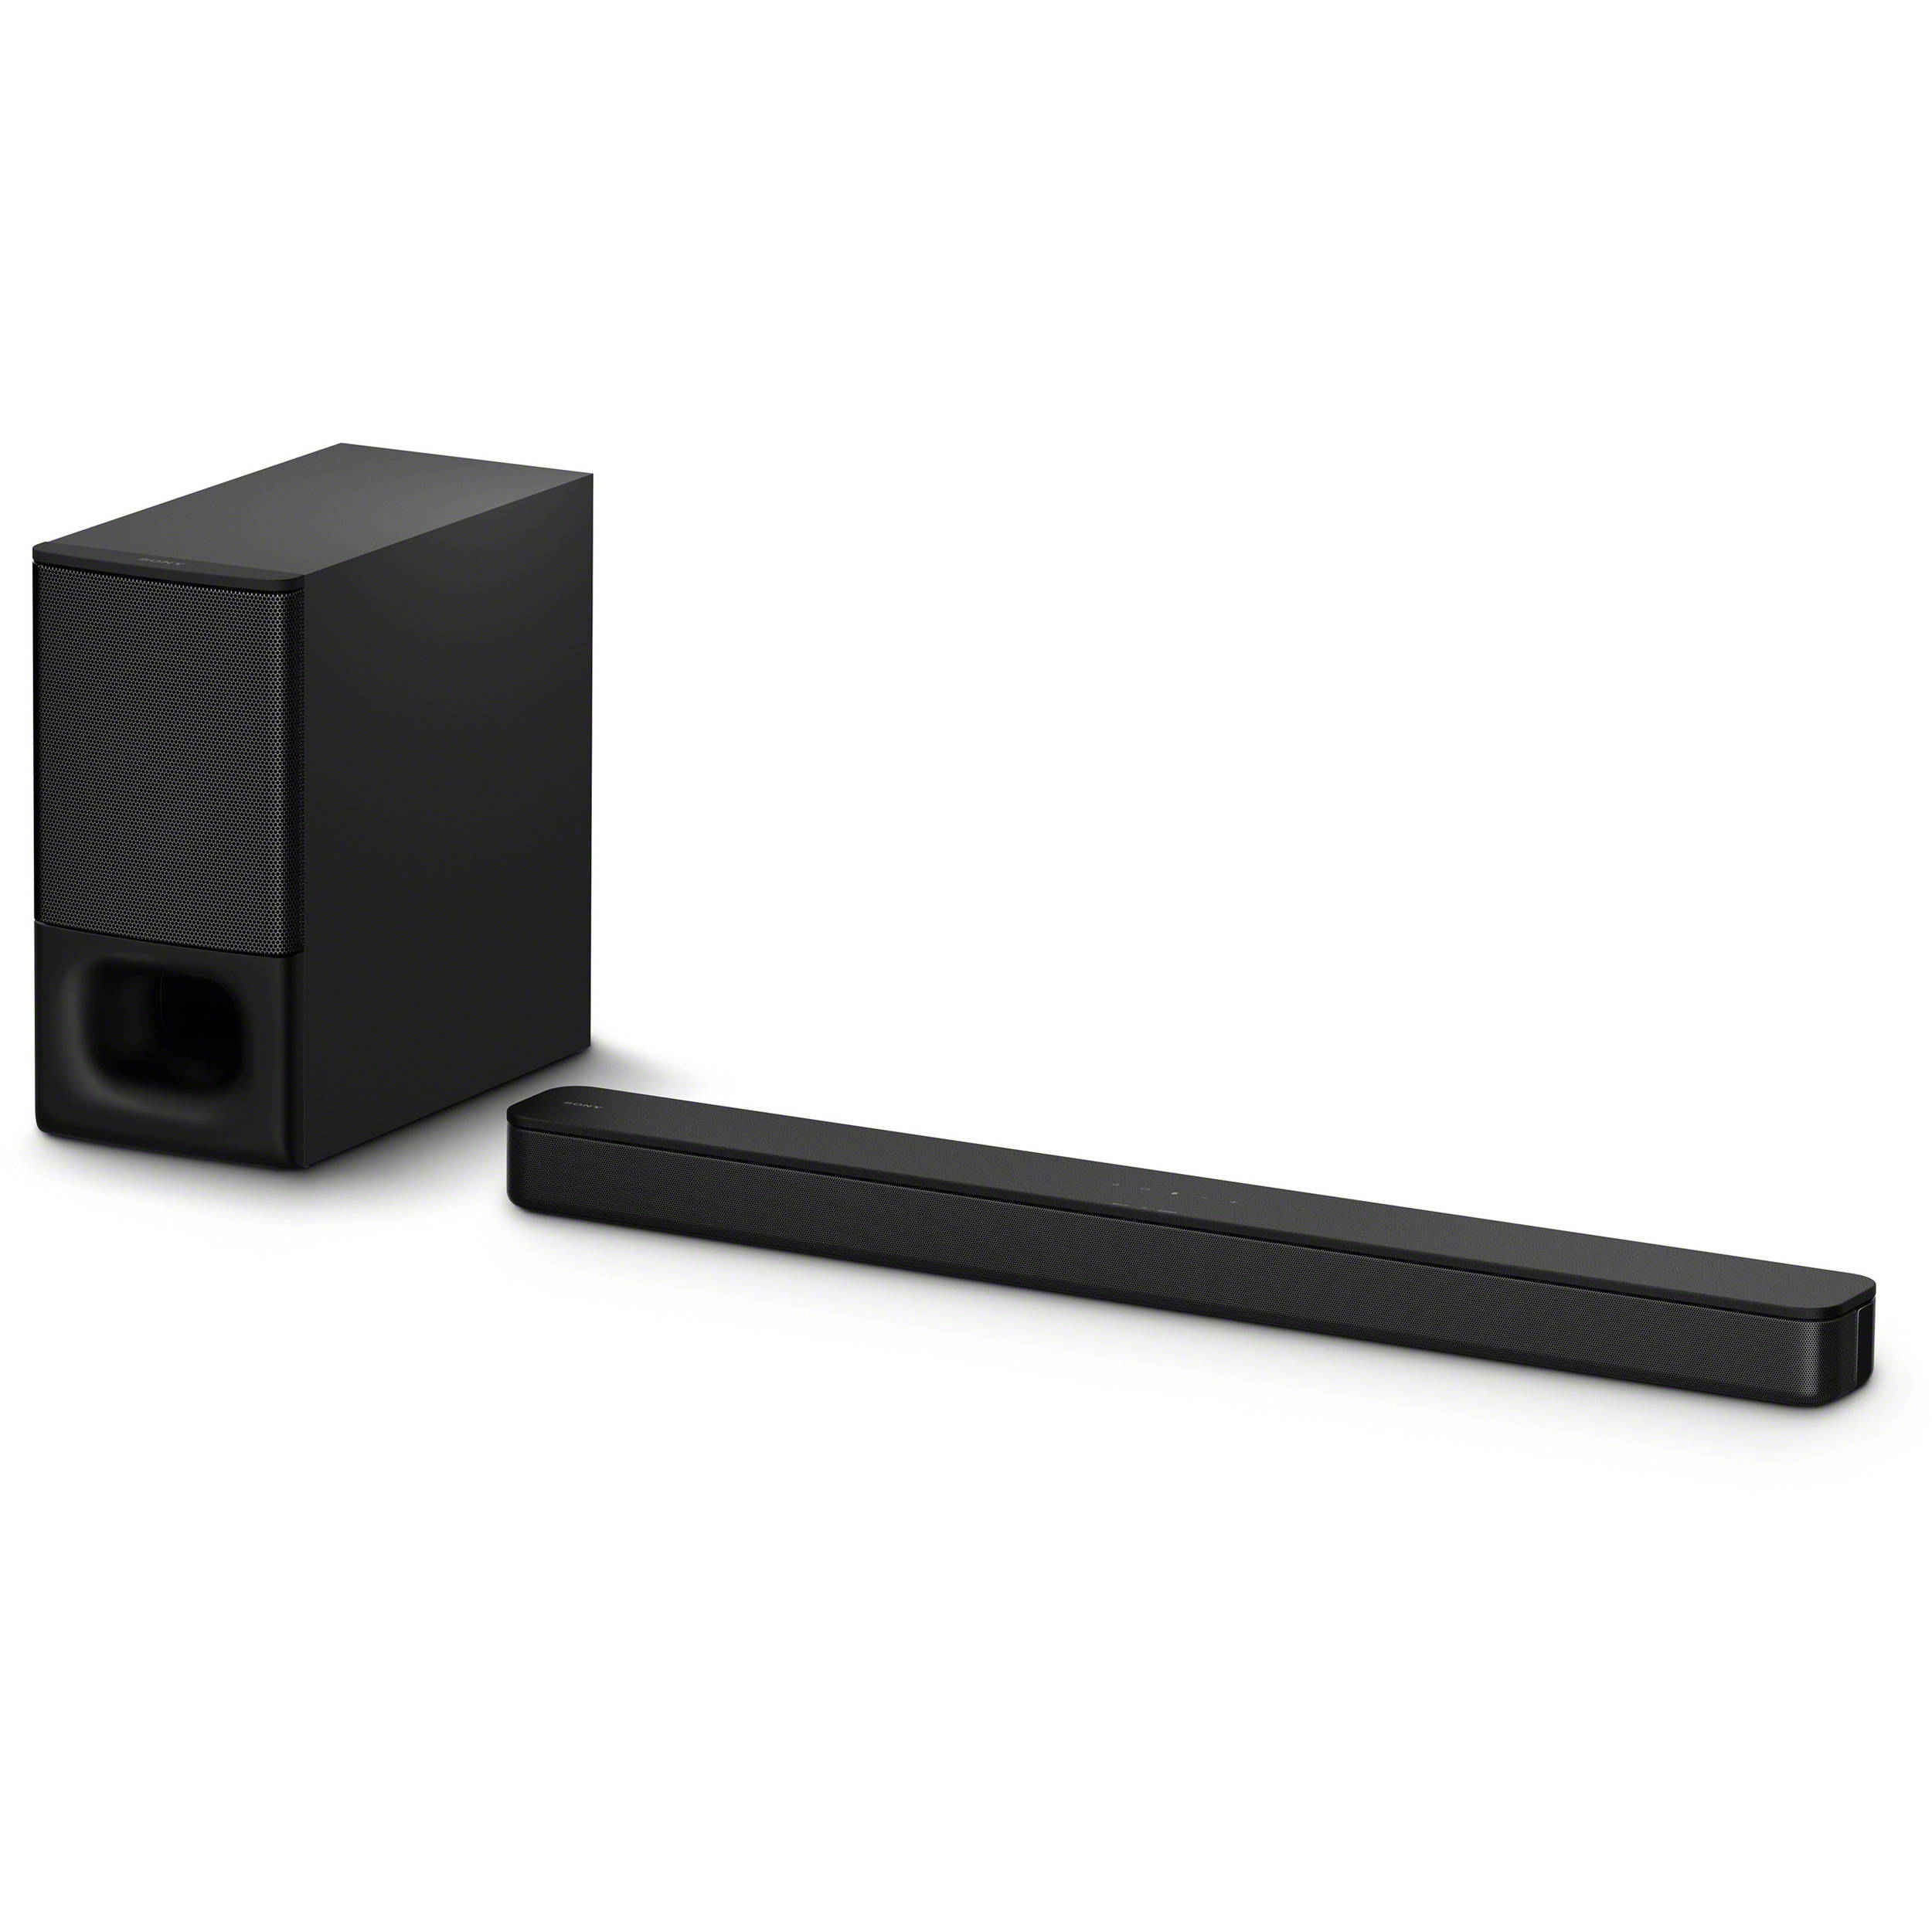 Sony 2.1CH Soundbar with Wireless Subwoofer - Bluetooth and HDMI Arc Compatible, HTS350